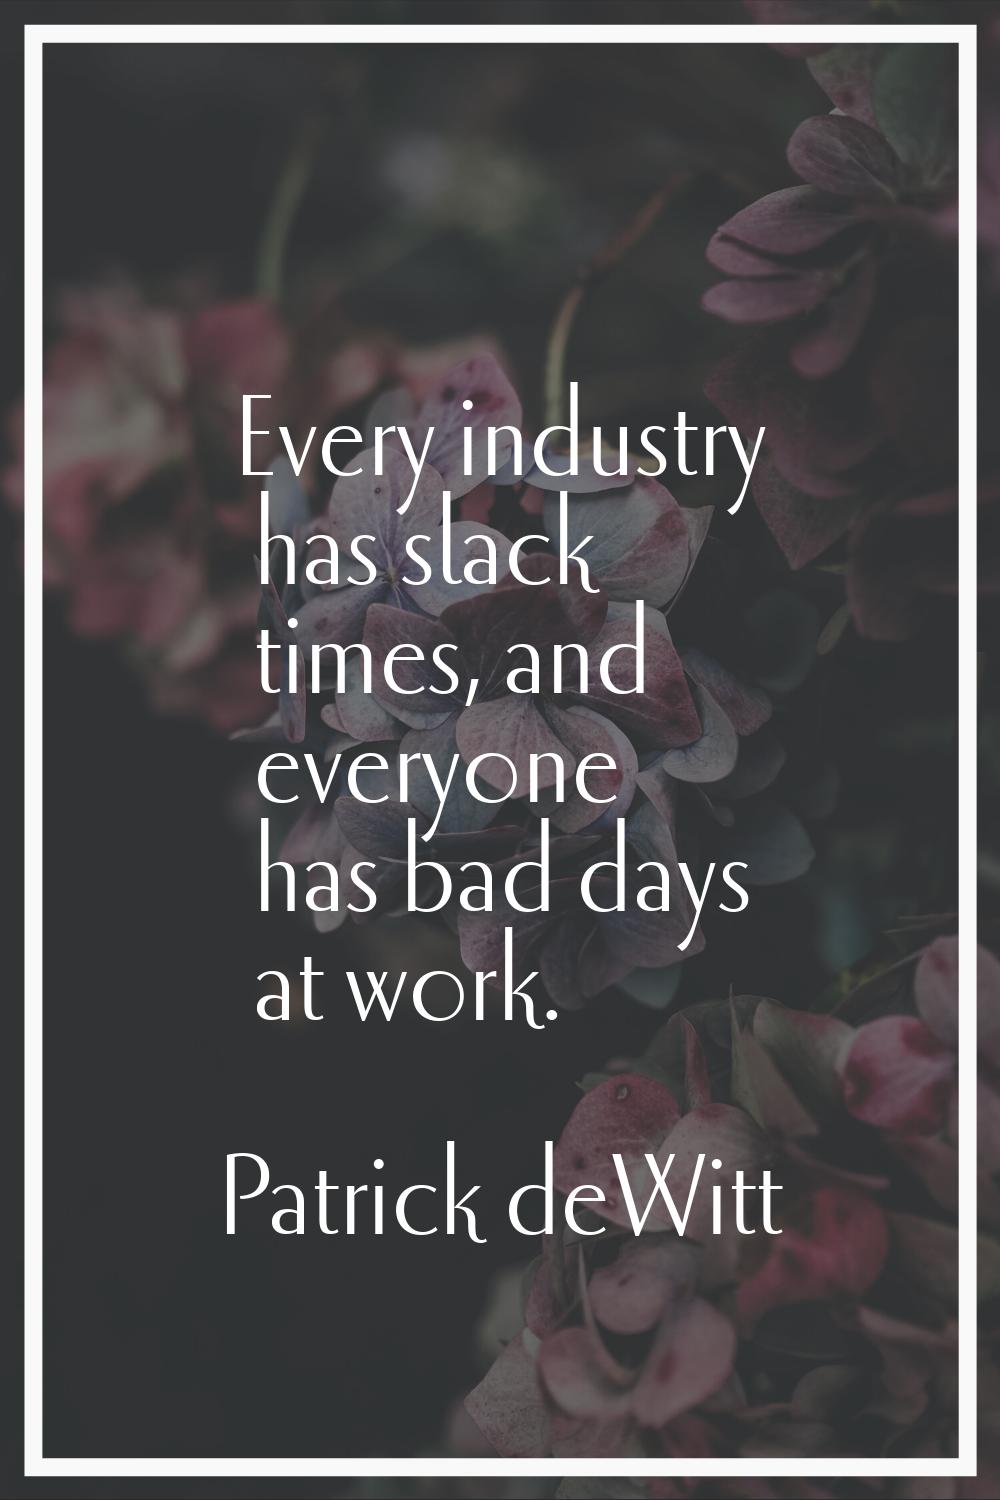 Every industry has slack times, and everyone has bad days at work.